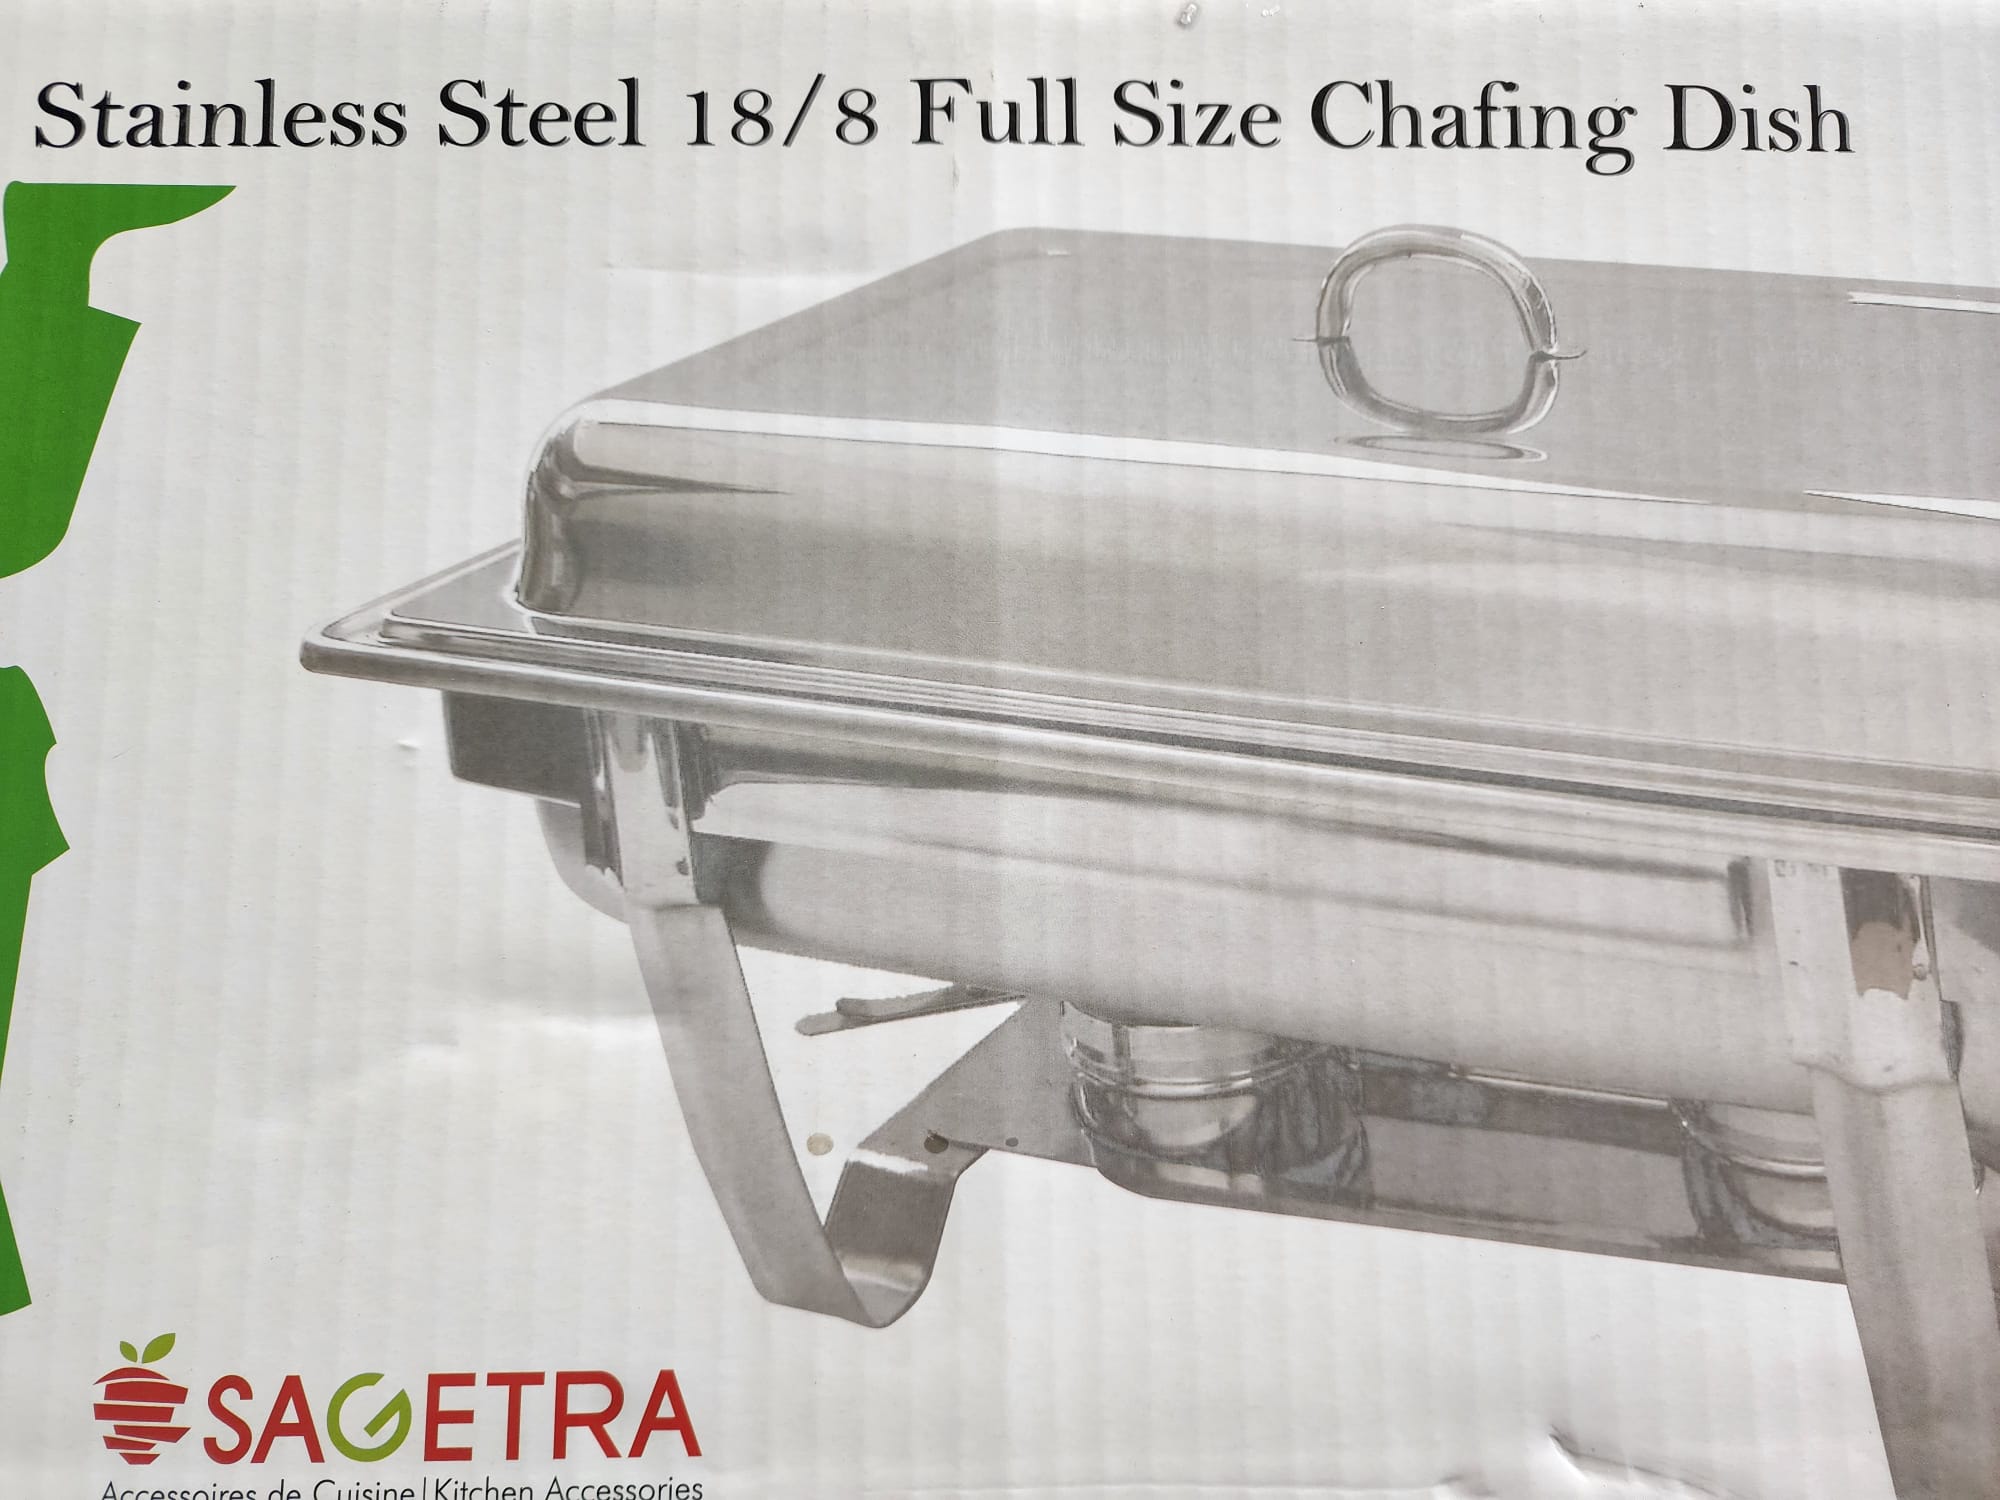 Sagetra - Full-size 18/8 Stainless-steel Chafing Dish Set